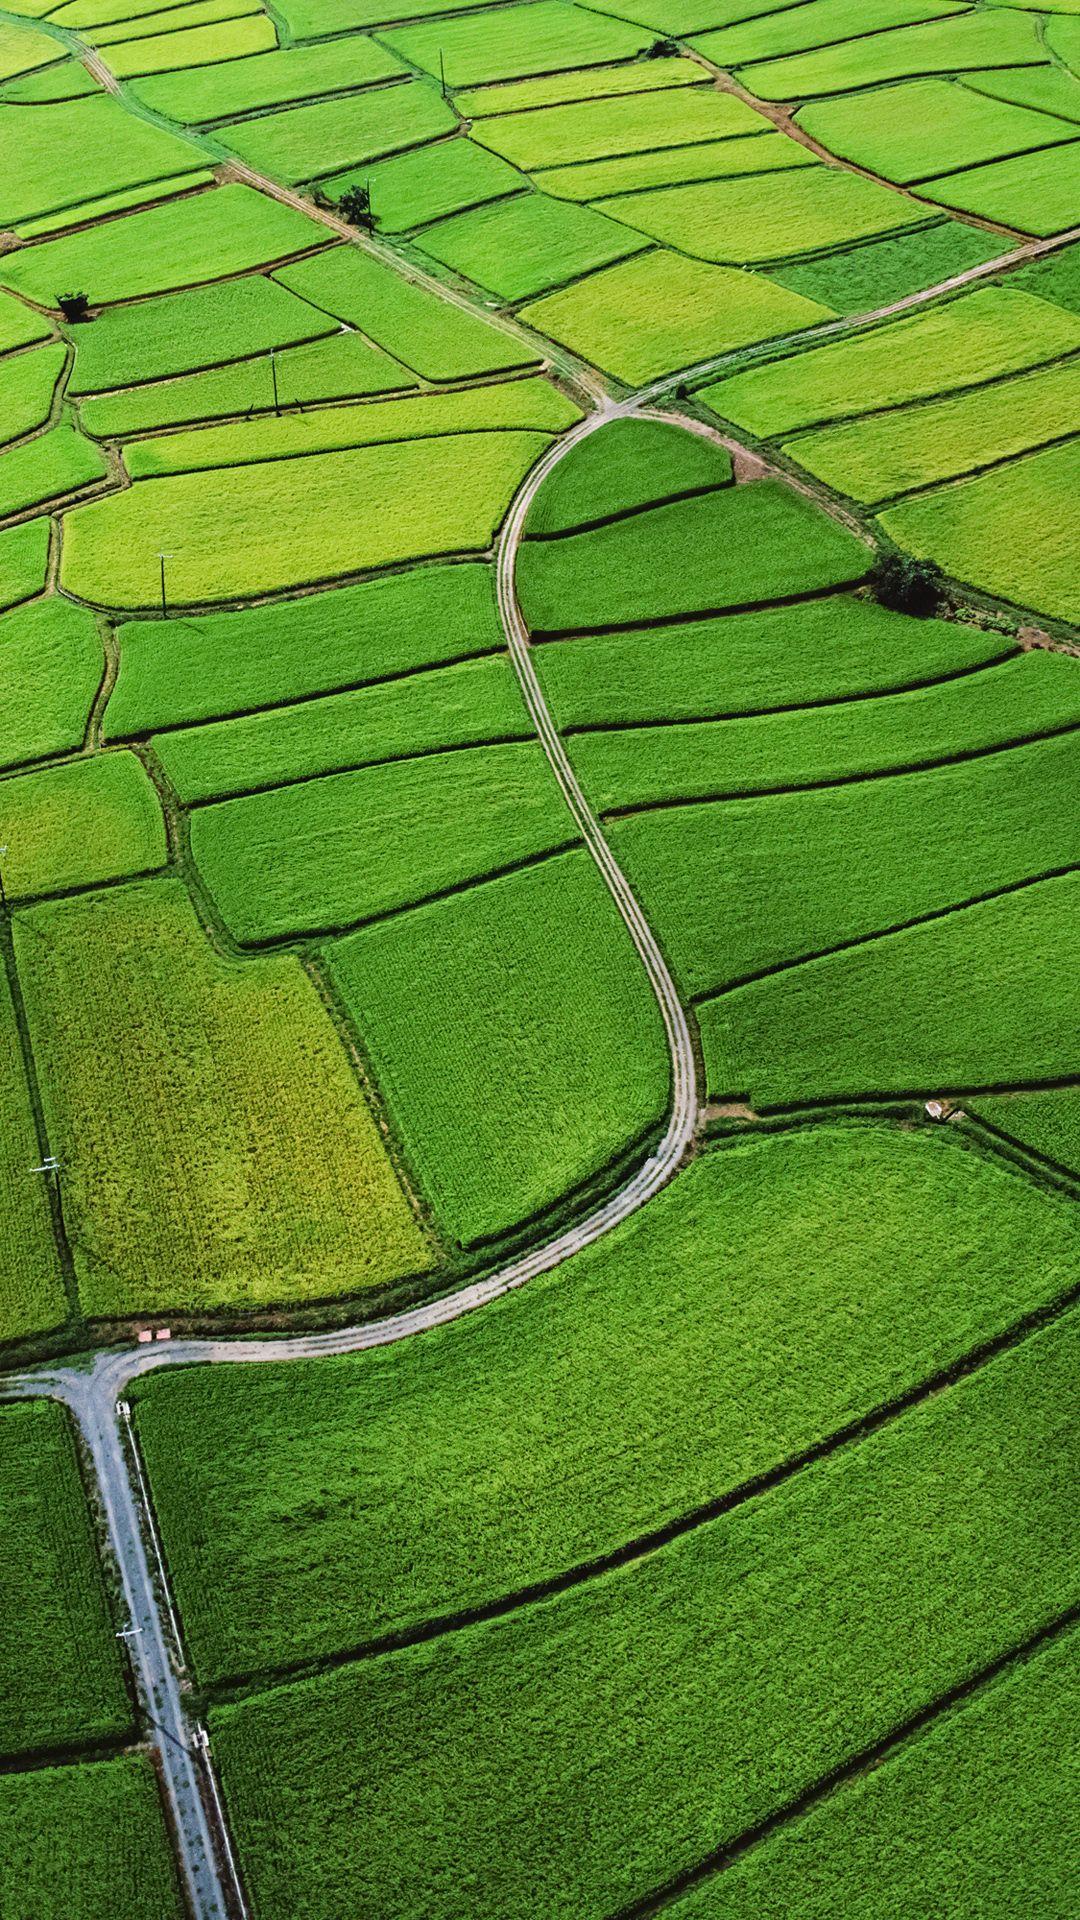 Rice field htc one wallpaper, free and easy to download